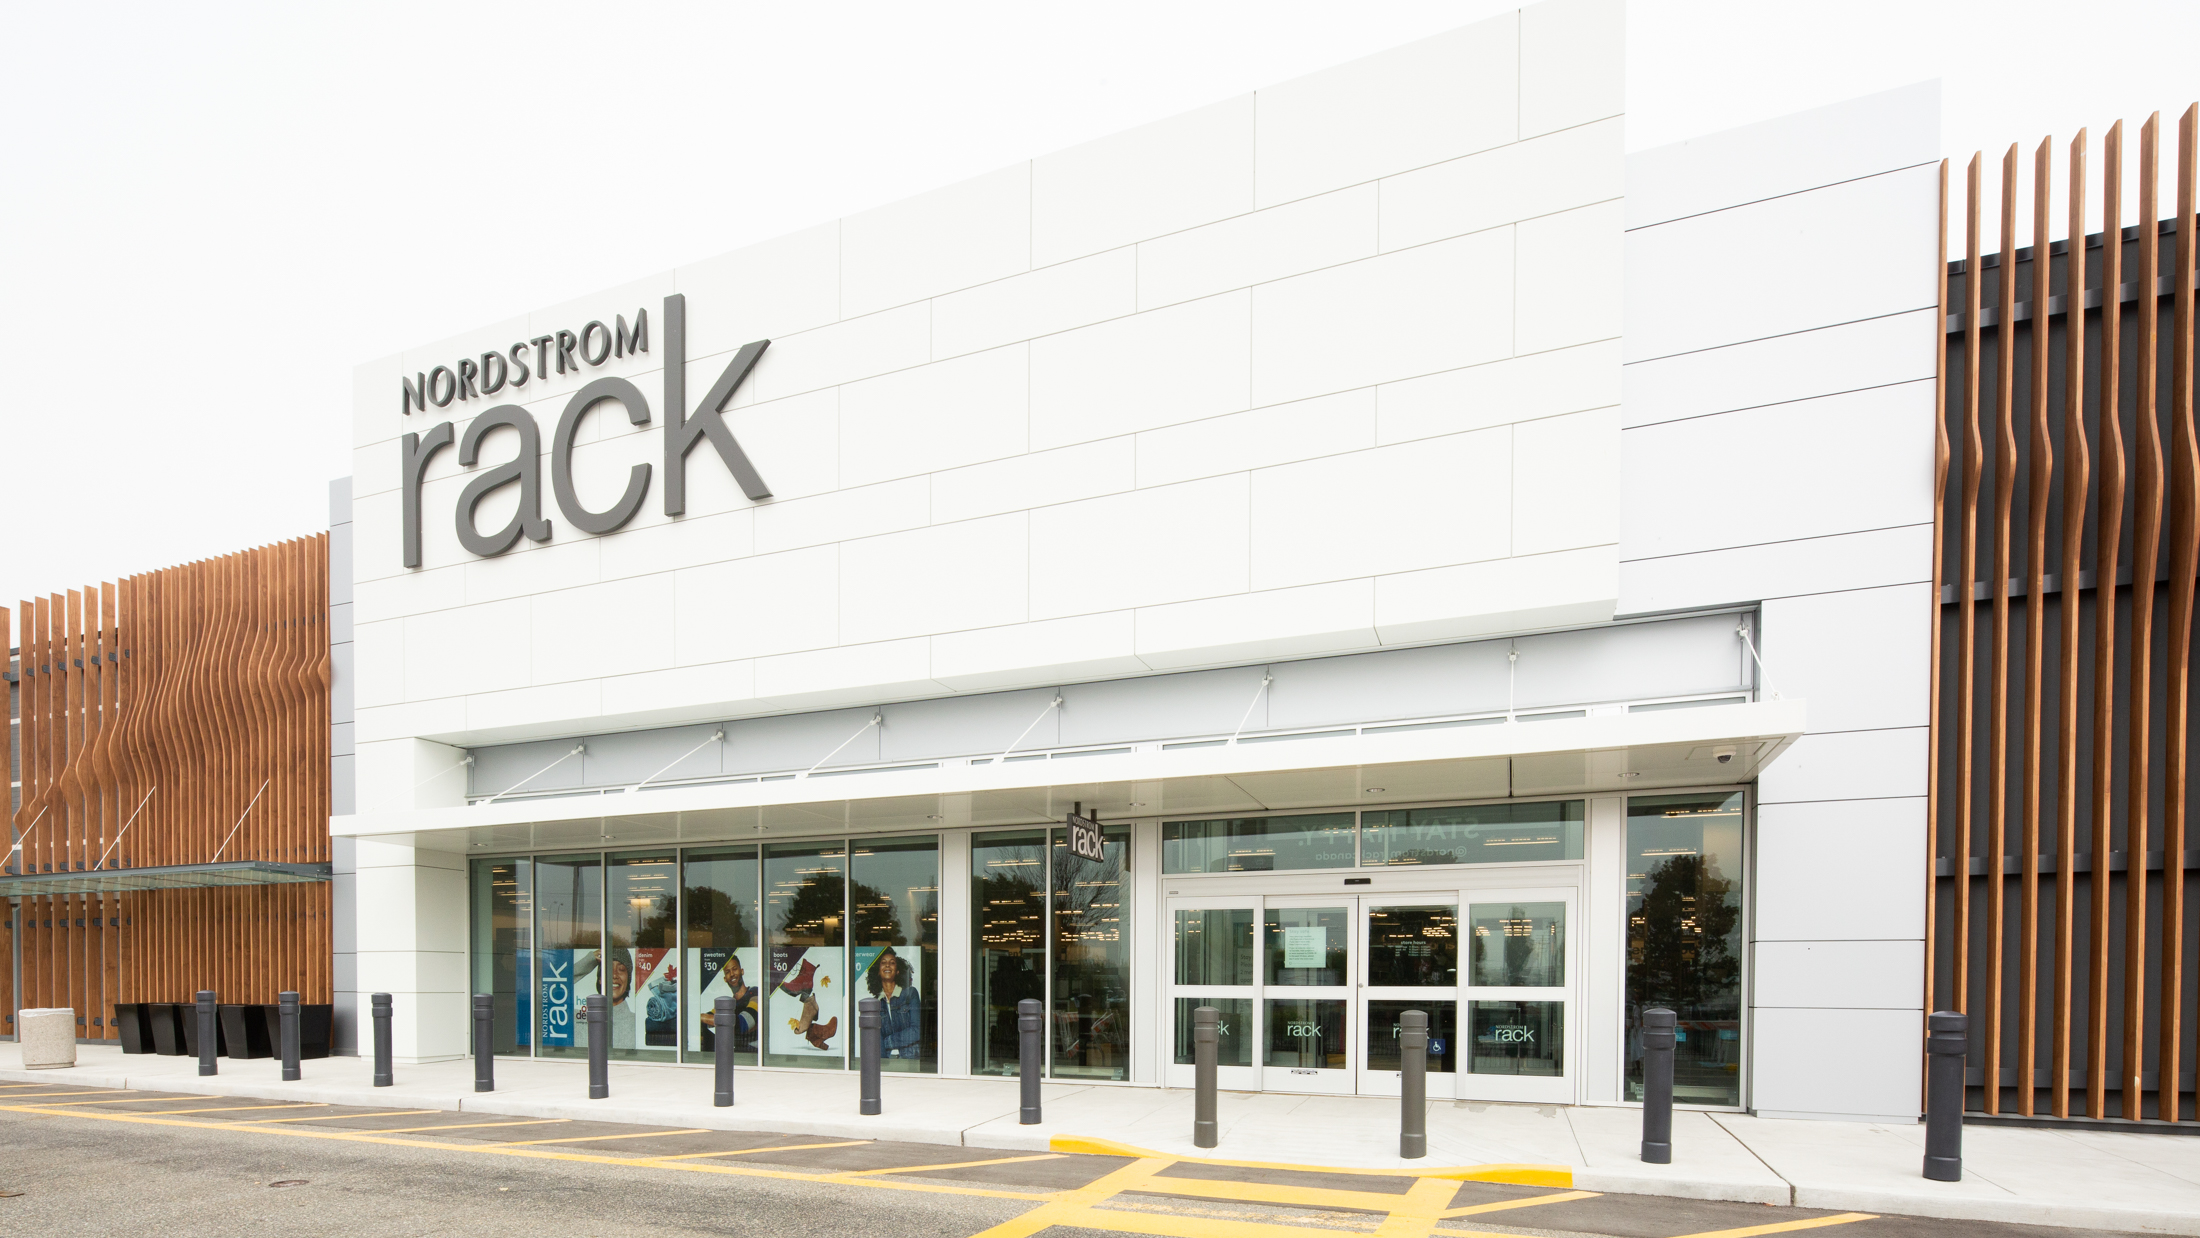 15 Stores Like Nordstrom Rack - PureWow